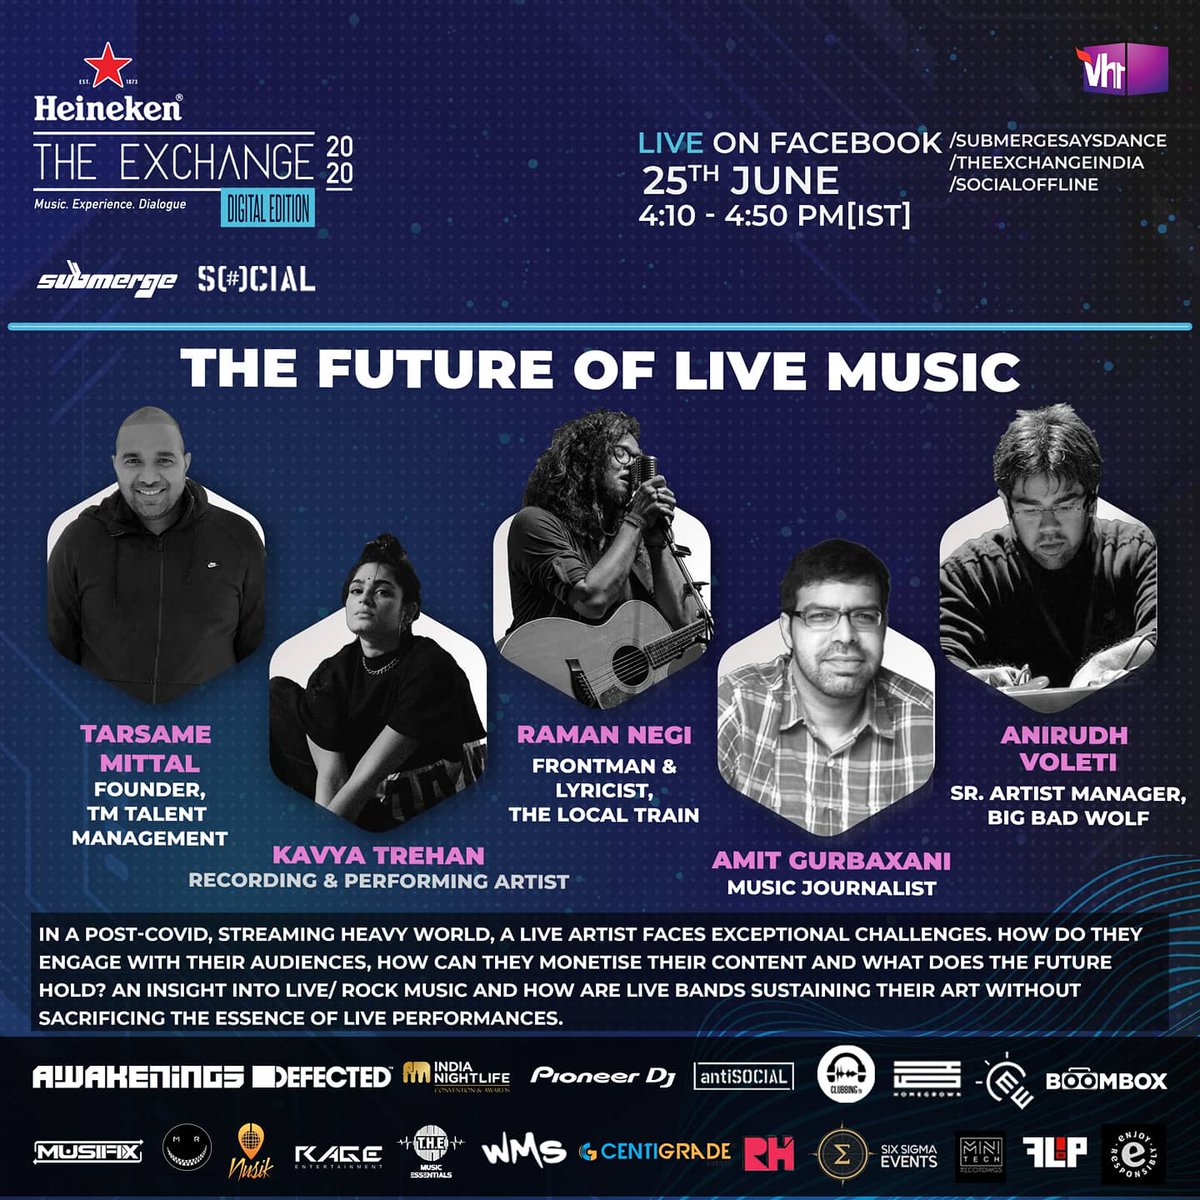 Catch @raman_negi live tomorrow on @TheExchangeIn panel!

Tune in at 4.10 PM on Facebook here - m.facebook.com/theexchangeInd… 

#TheExchange2020 #TheLocalTrain #tlt